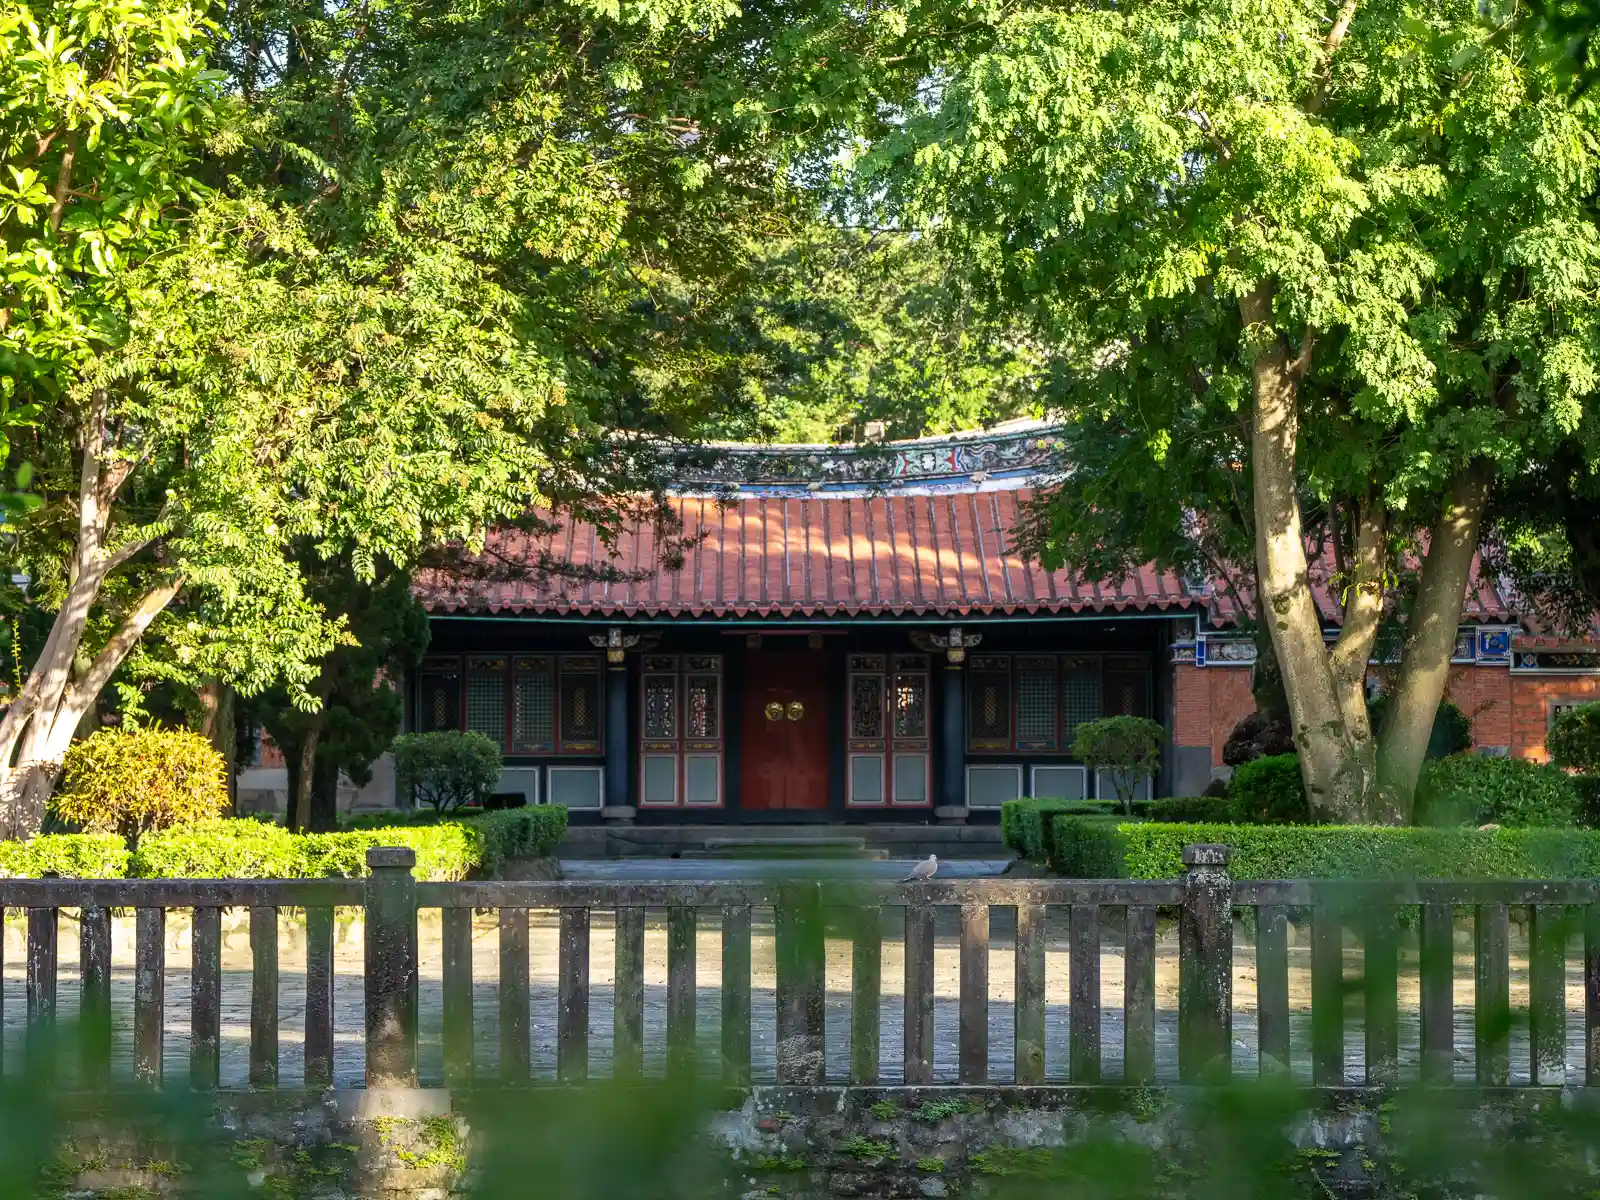 A beautifully preserved single story hall can be seen behind perfectly manicured gardens. The hall is made of red-brick and painted wood.